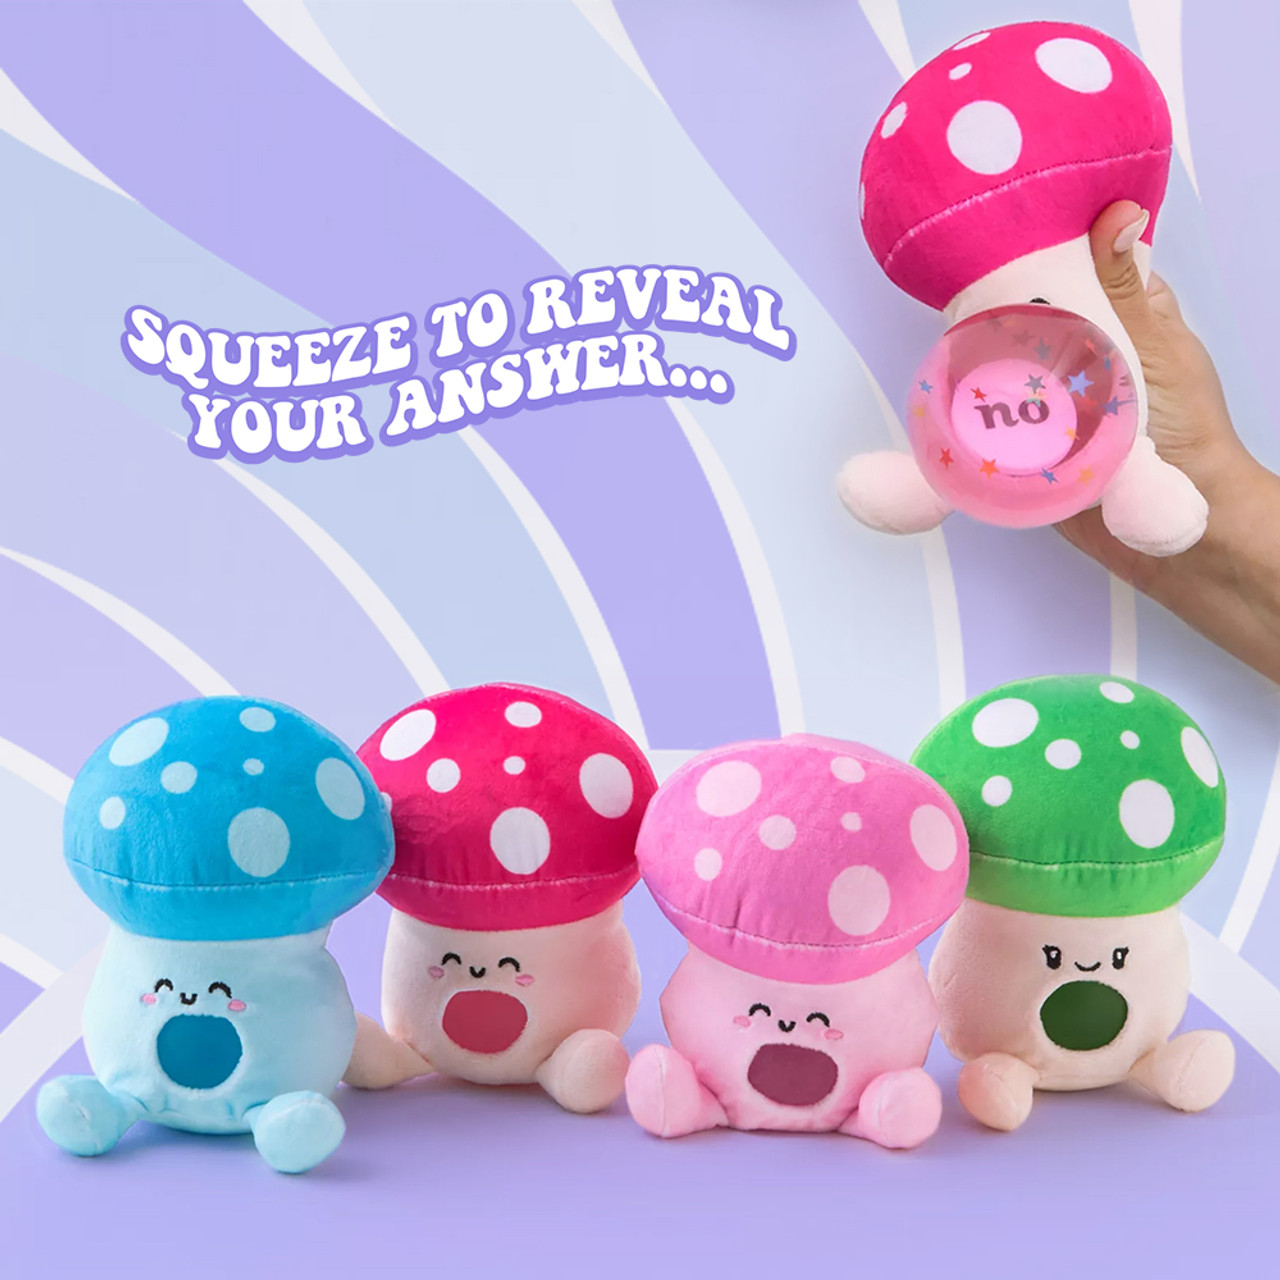 top trenz mushroom plush squish water ball toy collection with 5 different colors